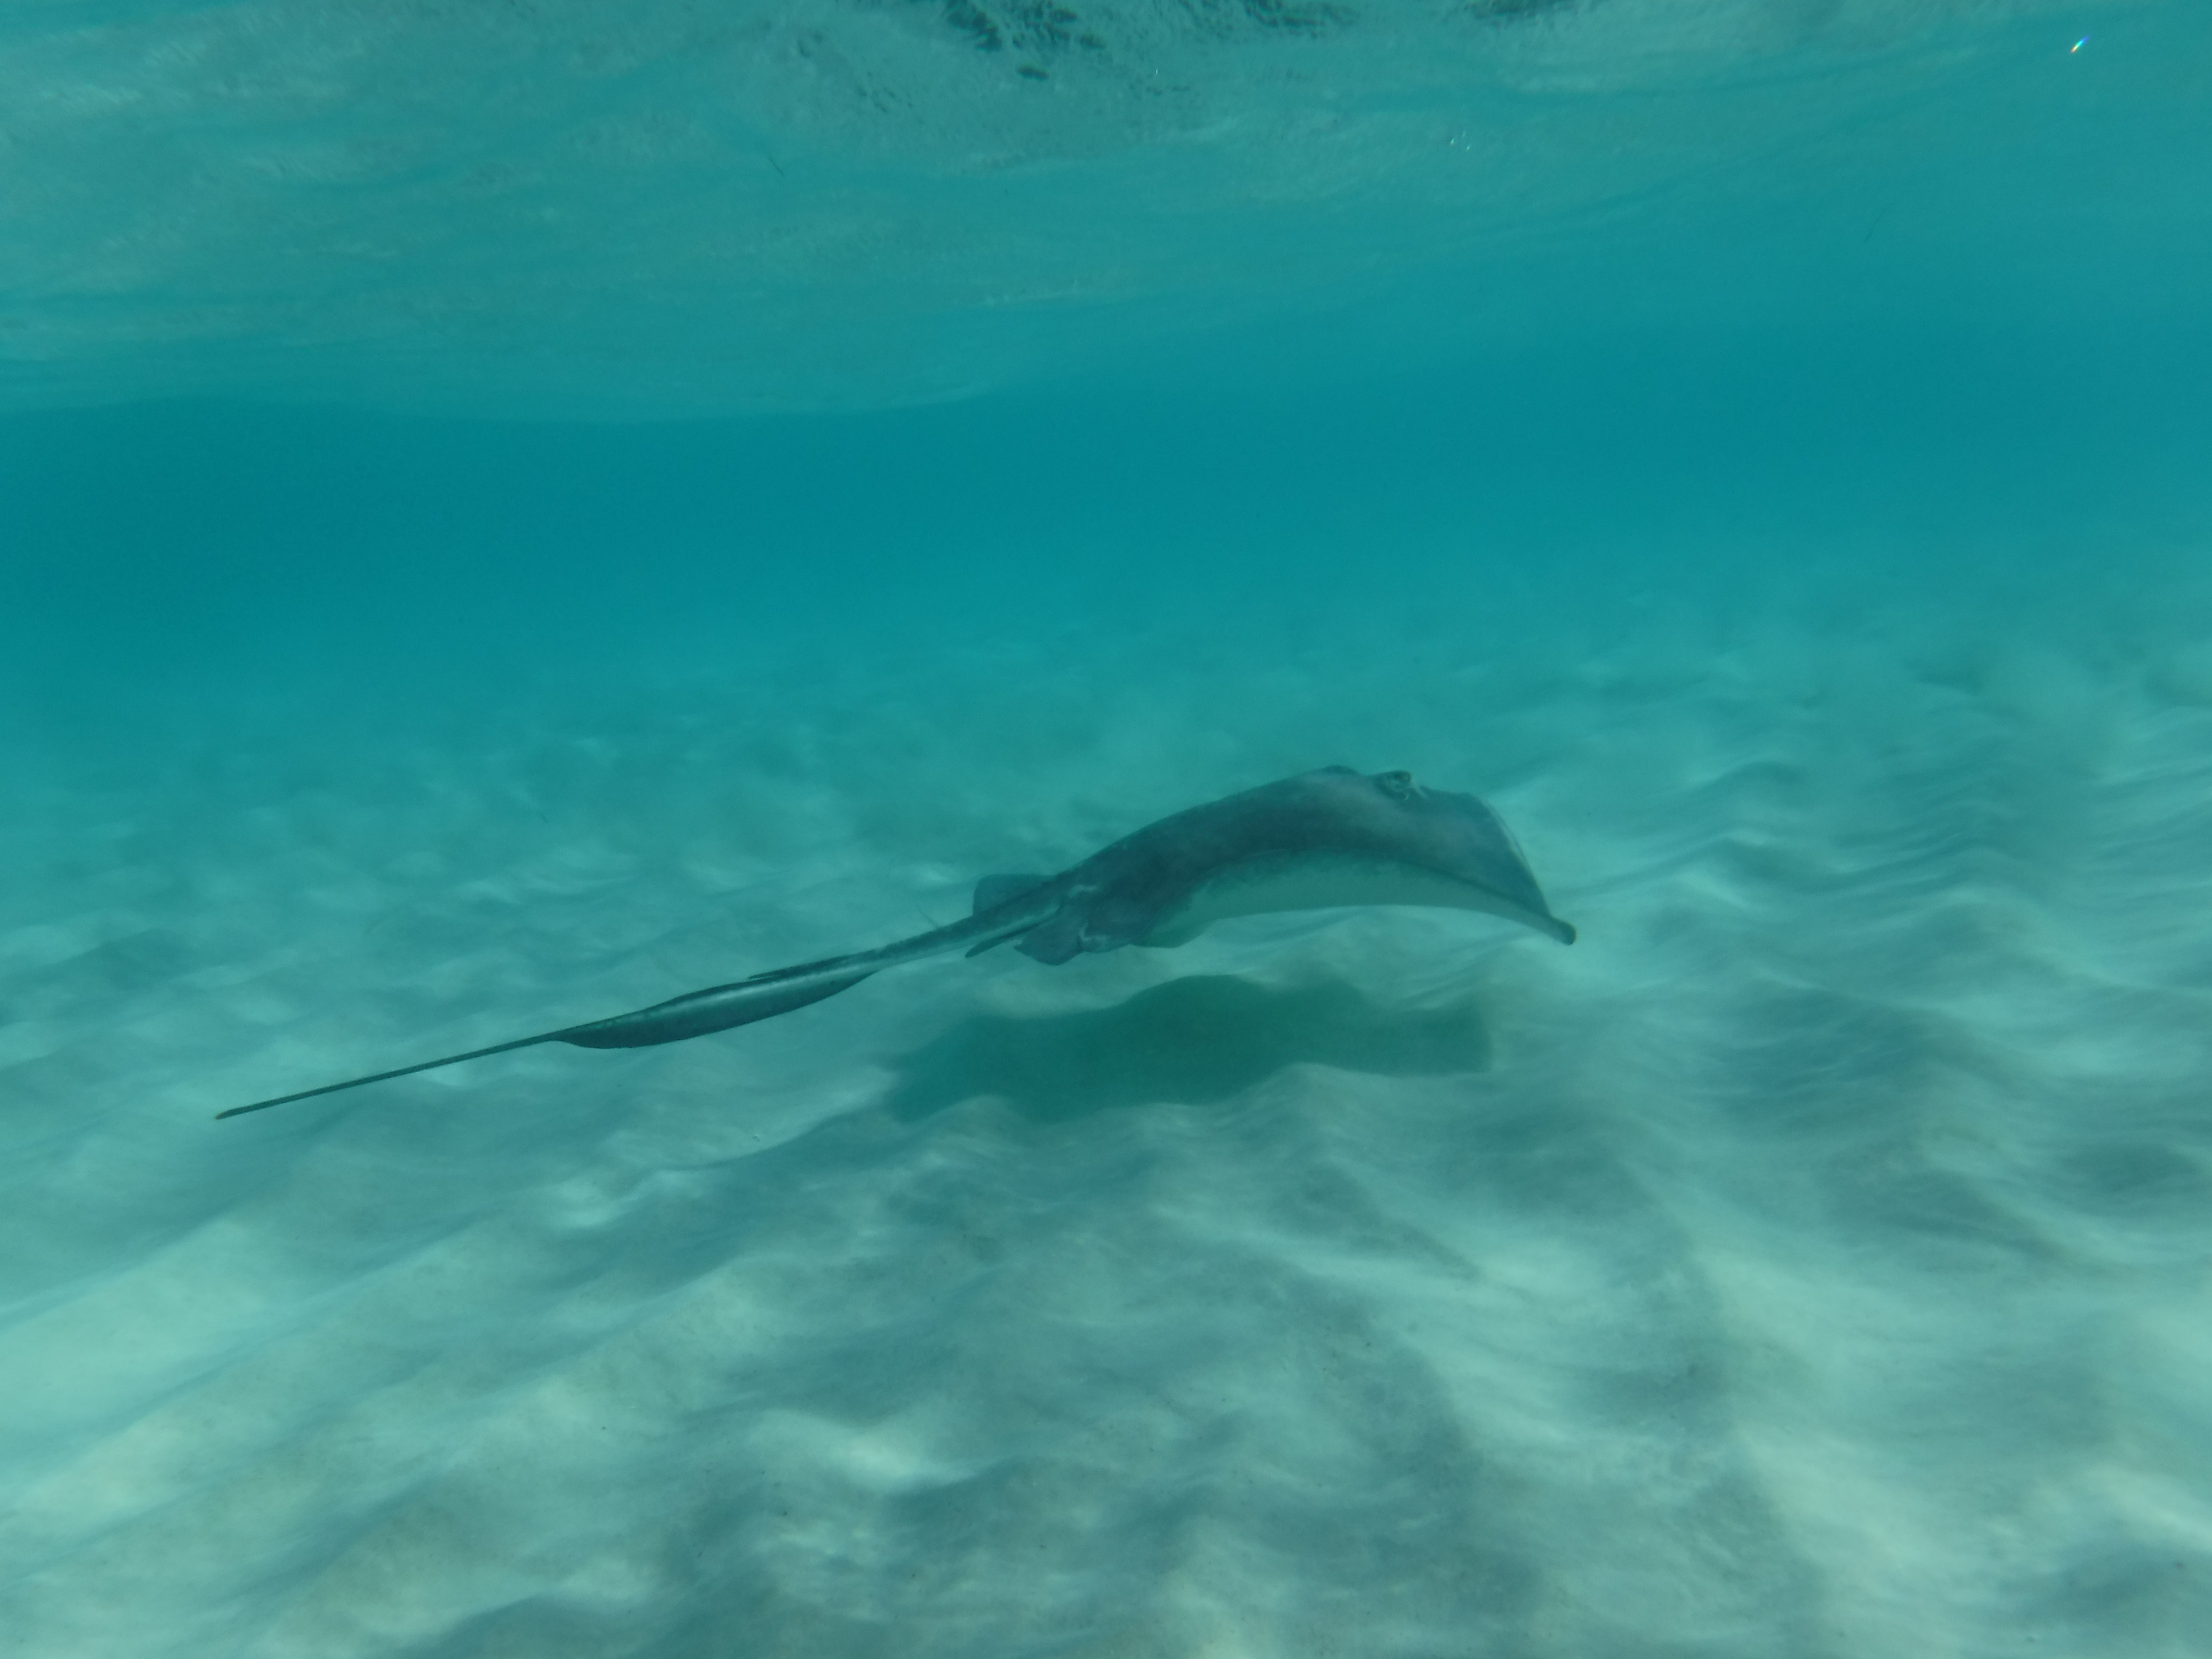 A picture of a stingray